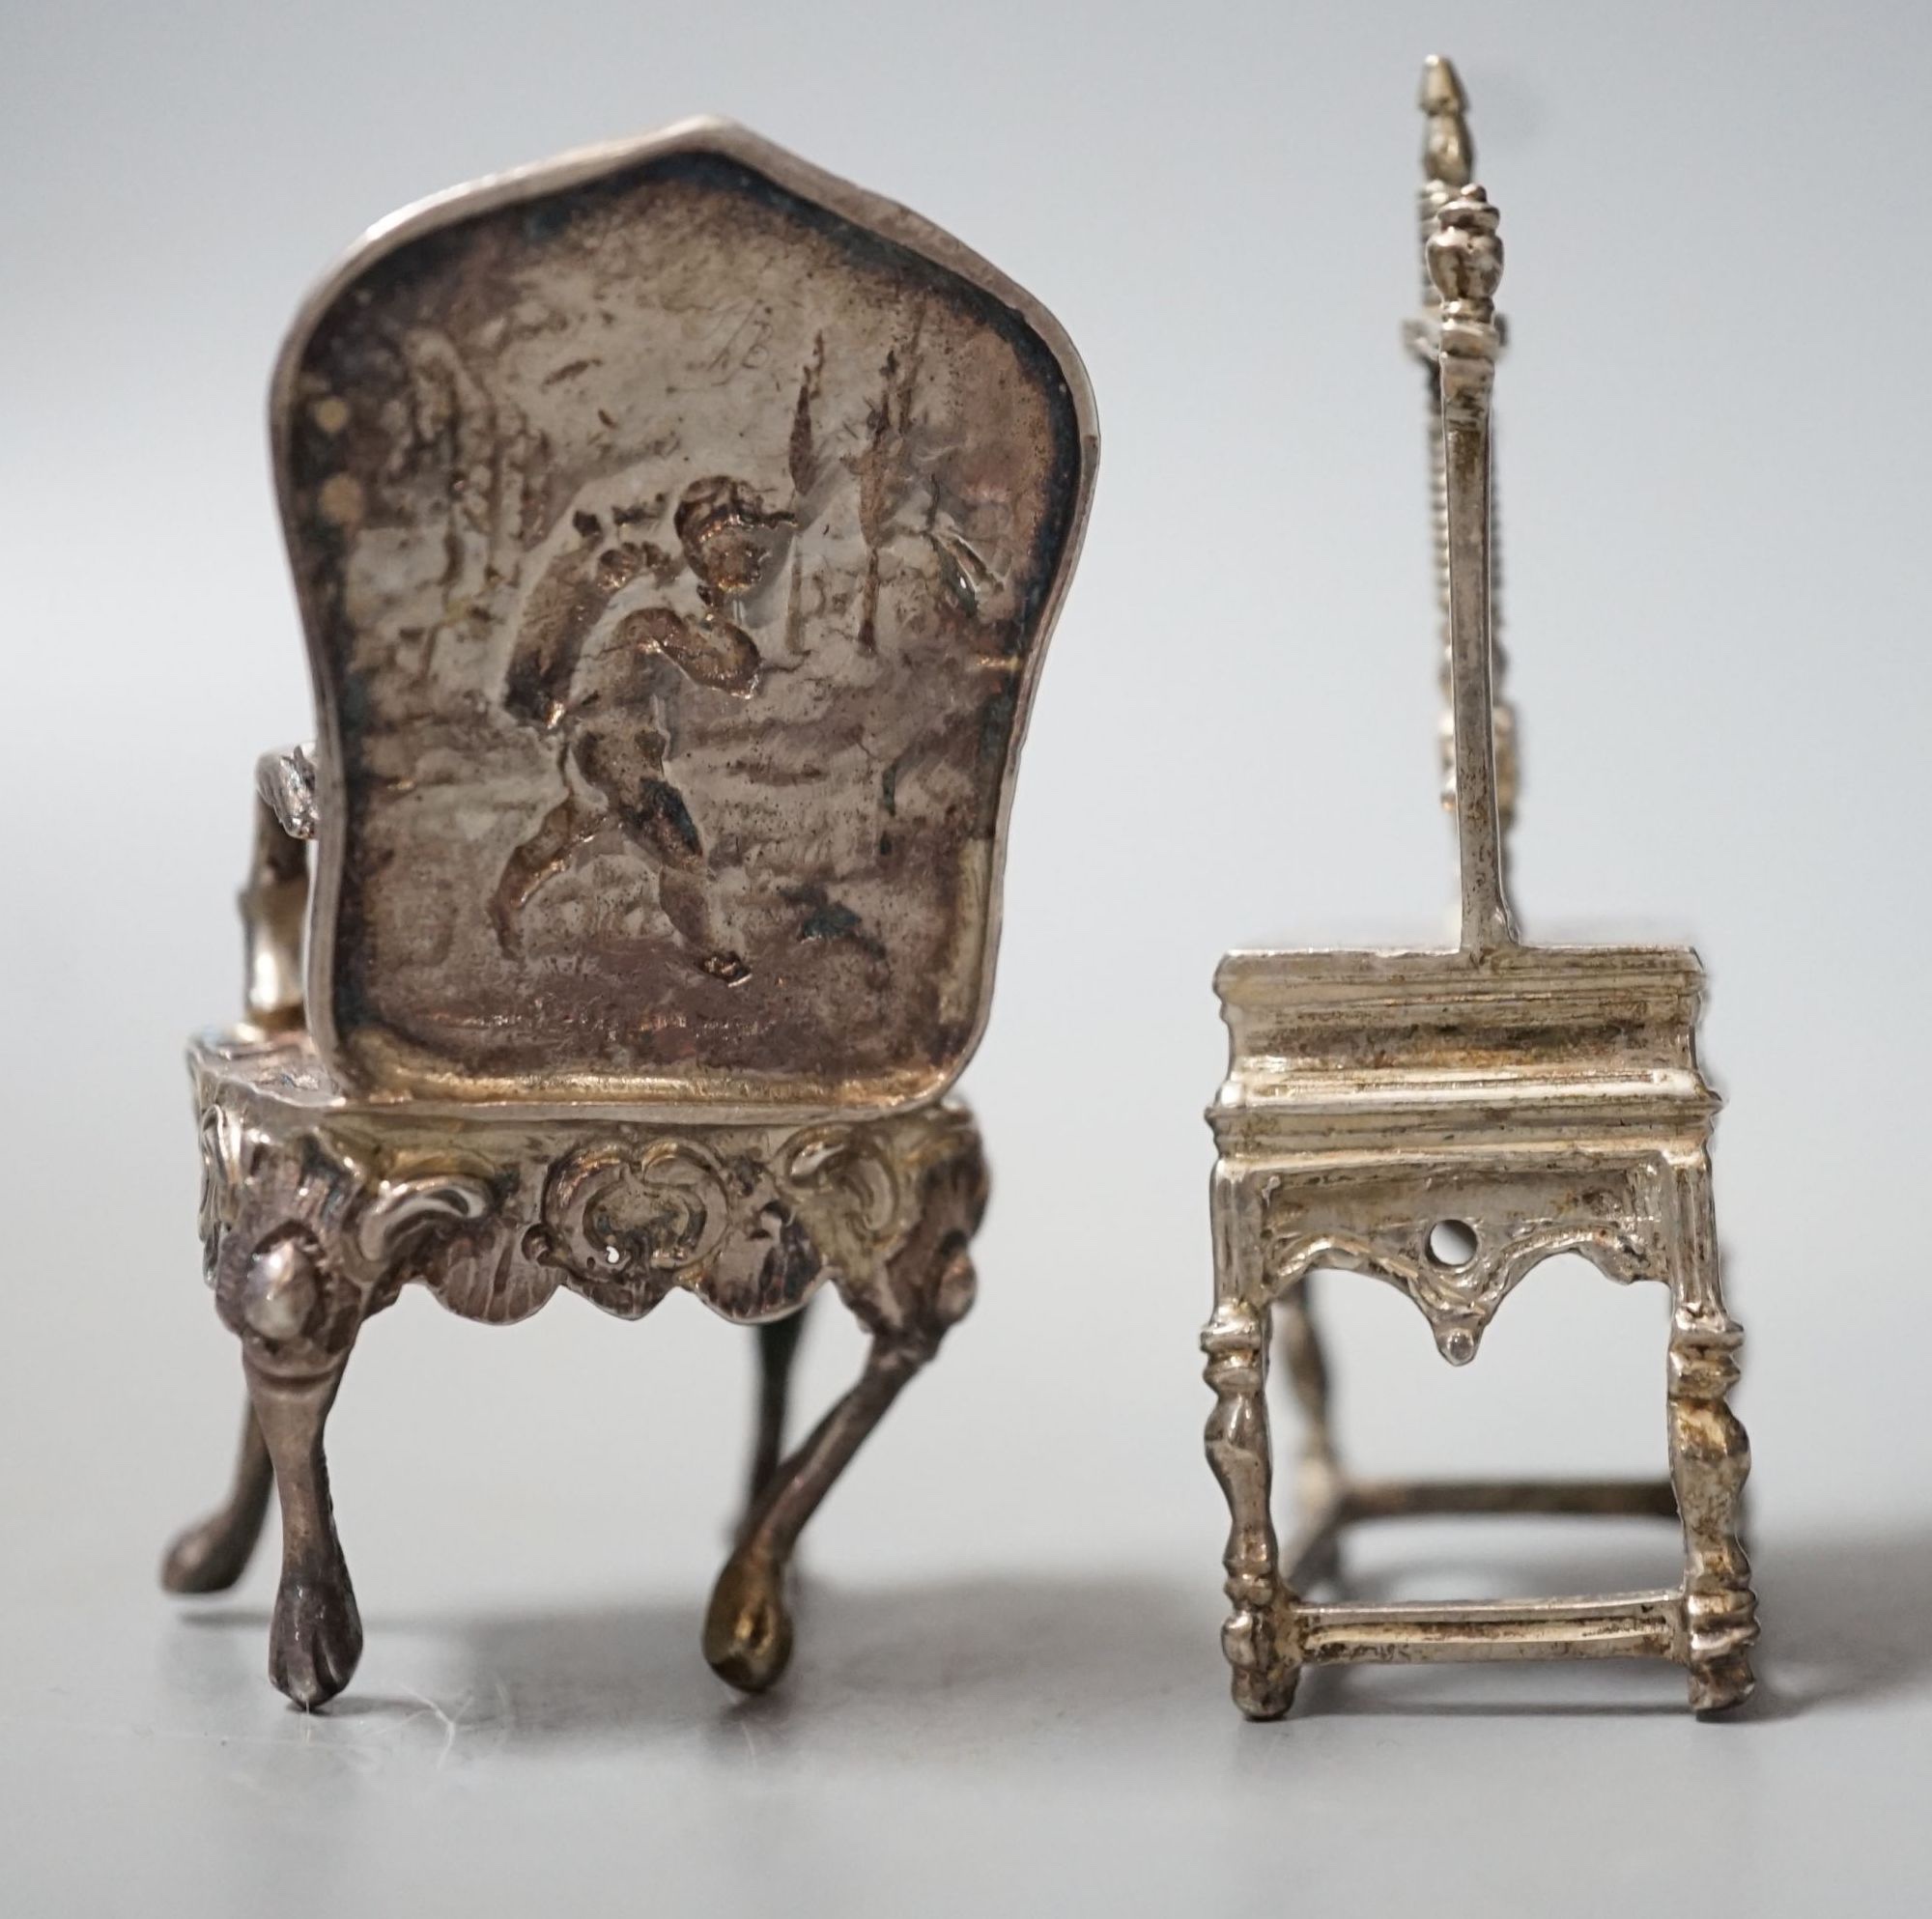 An Edwardian silver miniature model of an armchair, import marks for Glasgow, 1902, 64mm and a white metal model of a press.